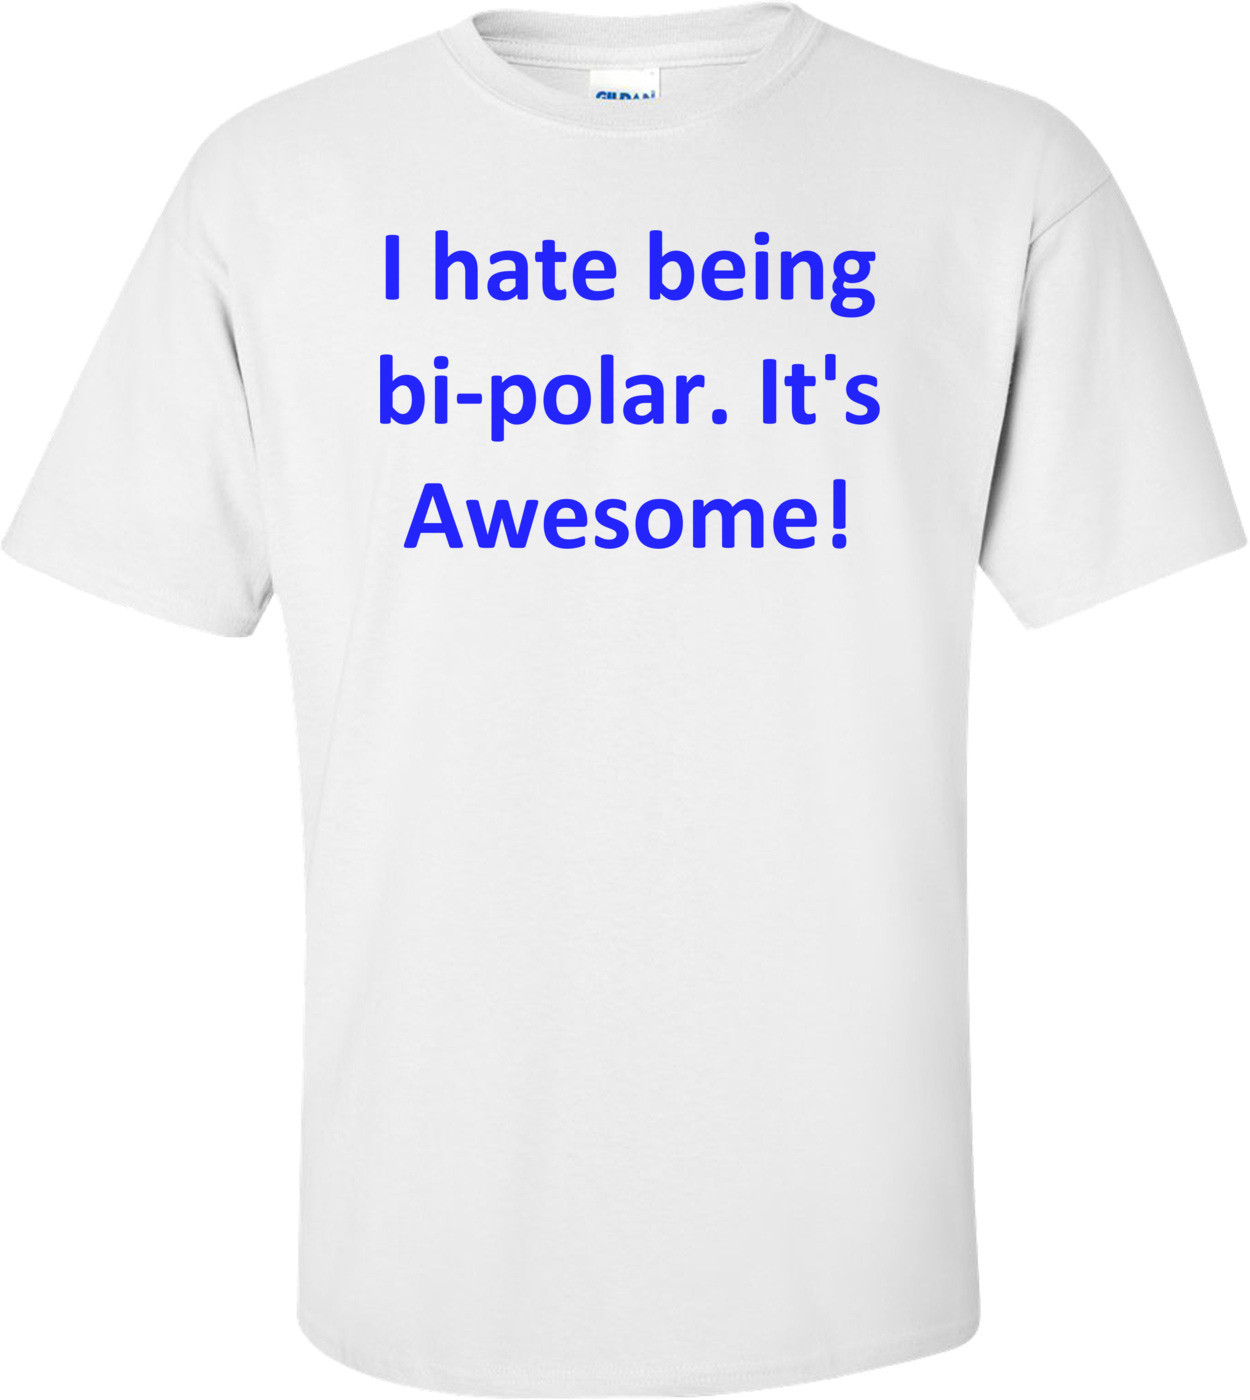 I hate being bi-polar. It's Awesome!